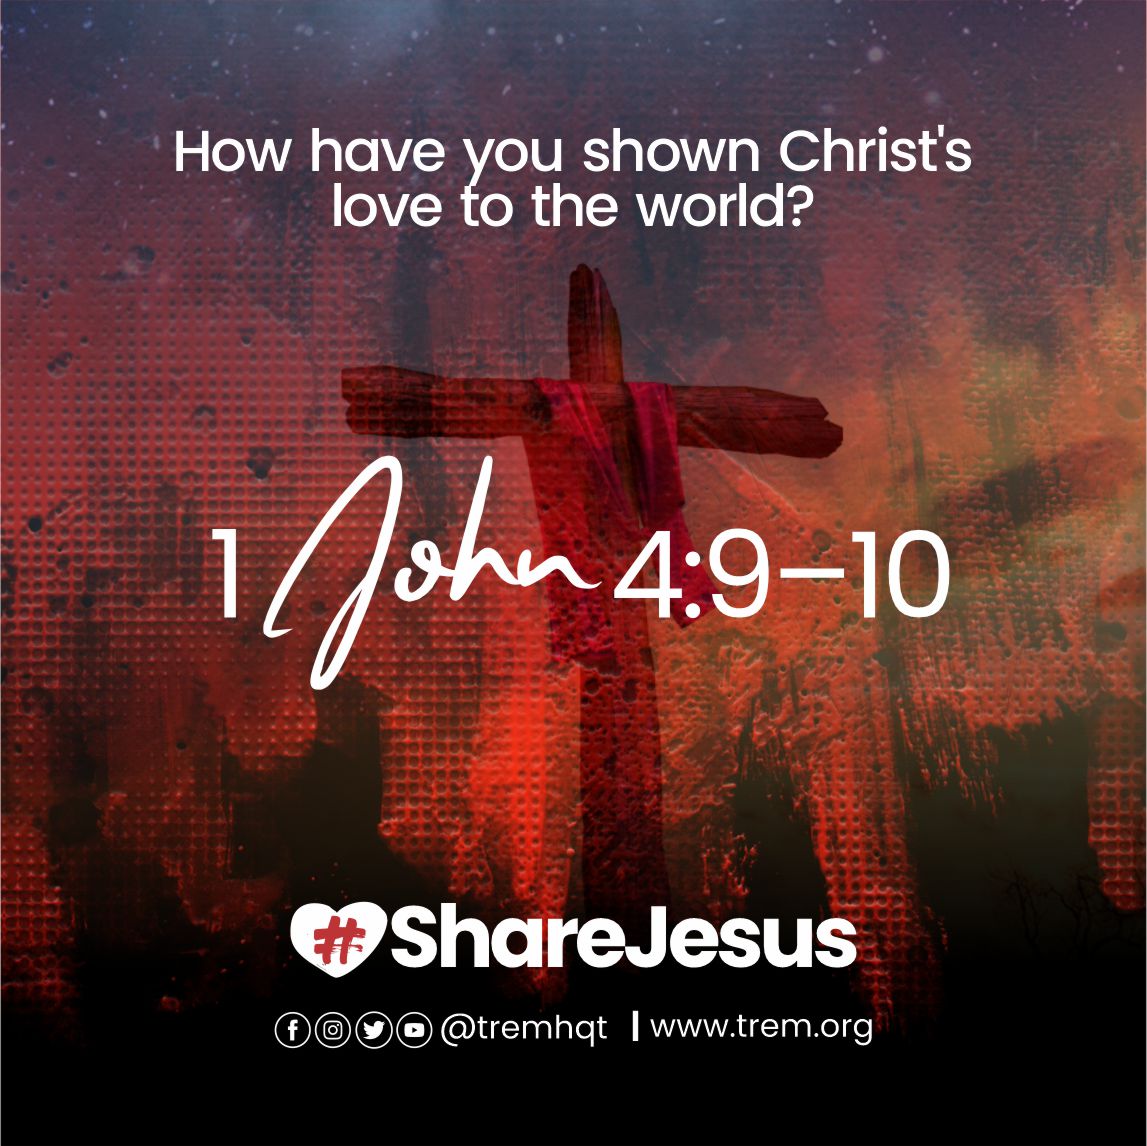 Christ is Love personified.

Extend the love of Christ to others this month.
#ShareJesus!

#TREM #ExceedingGreatReward